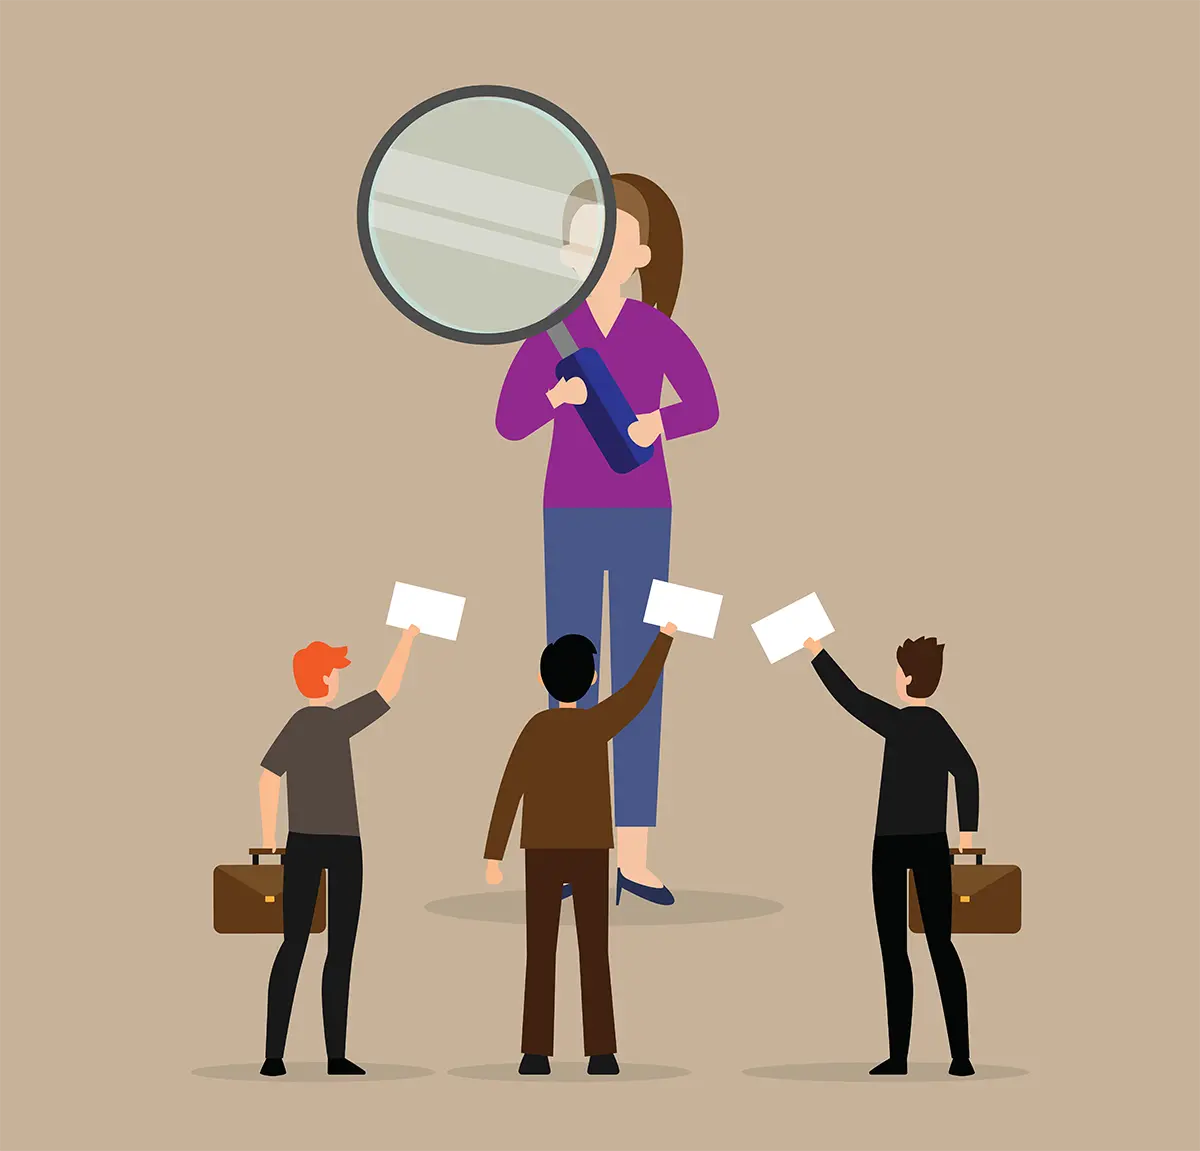 Vector digital illustration of a woman in a purple blouse, dark blue dress pants, and navy blue heels holding a magnifying glass and three men in business attire holding white small signs grabbing the attention of the woman (two of the men are holding briefcases) on a tan colored background